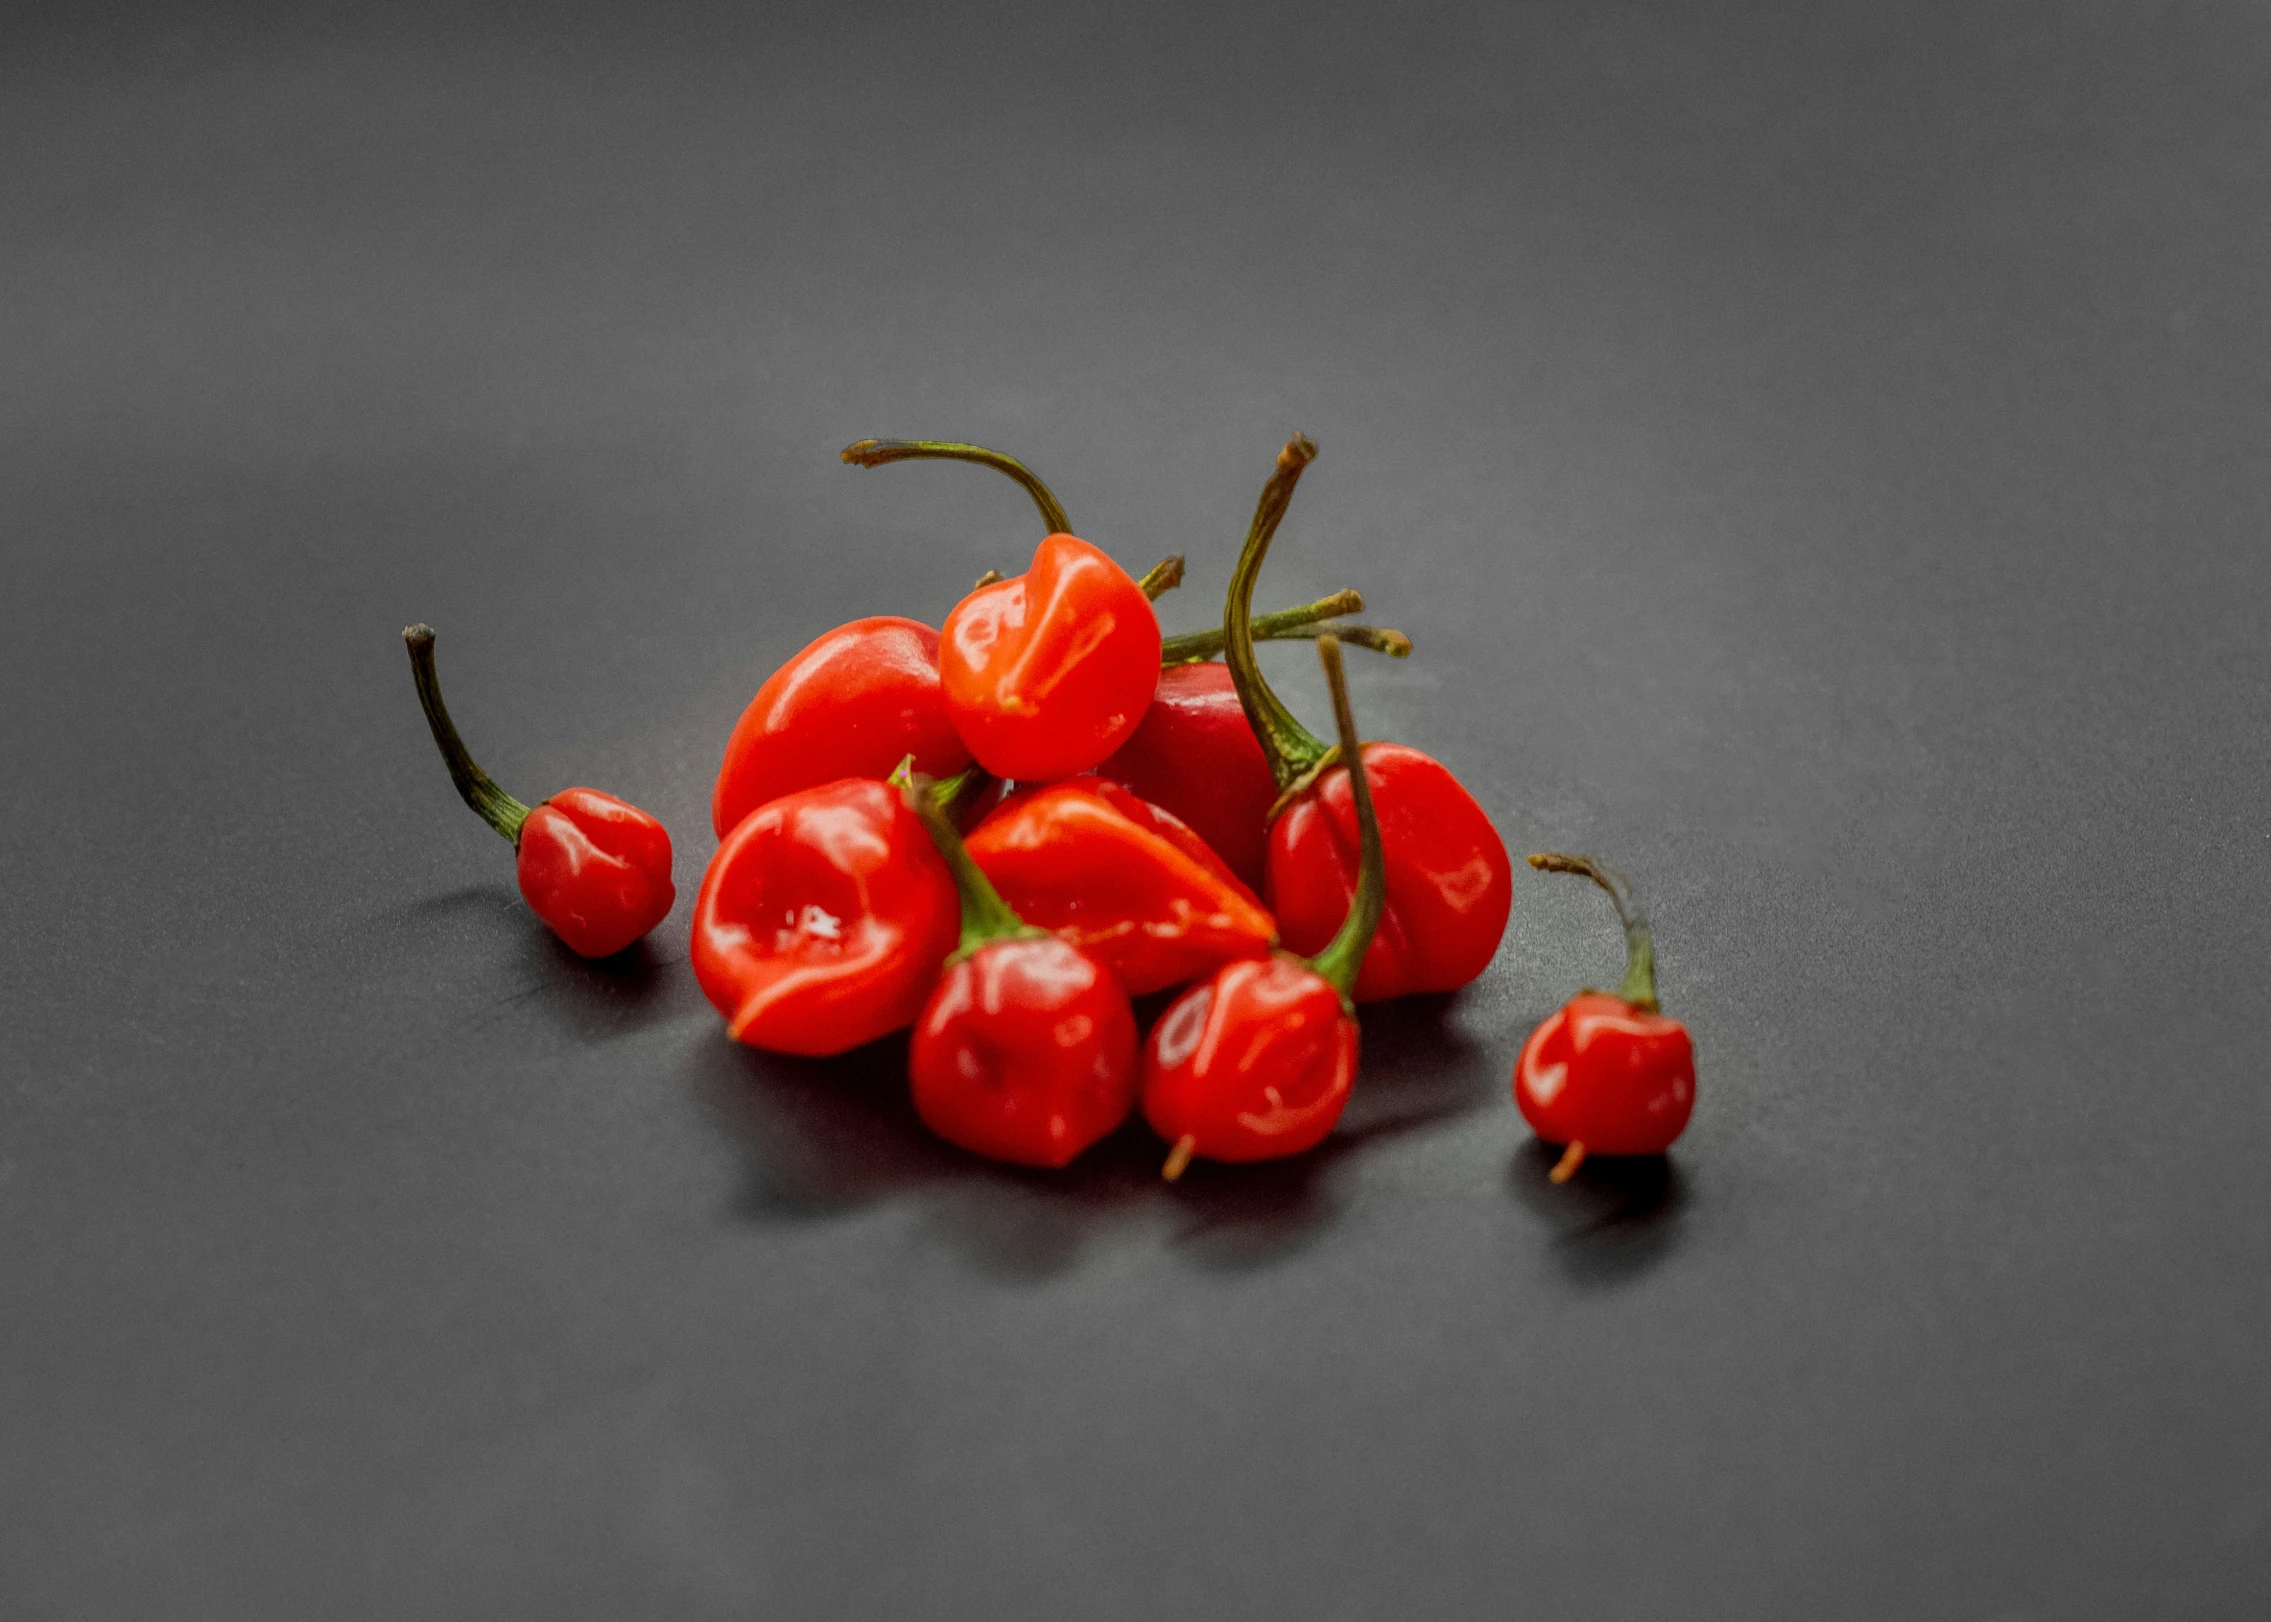 several small red bell peppers on a black surface